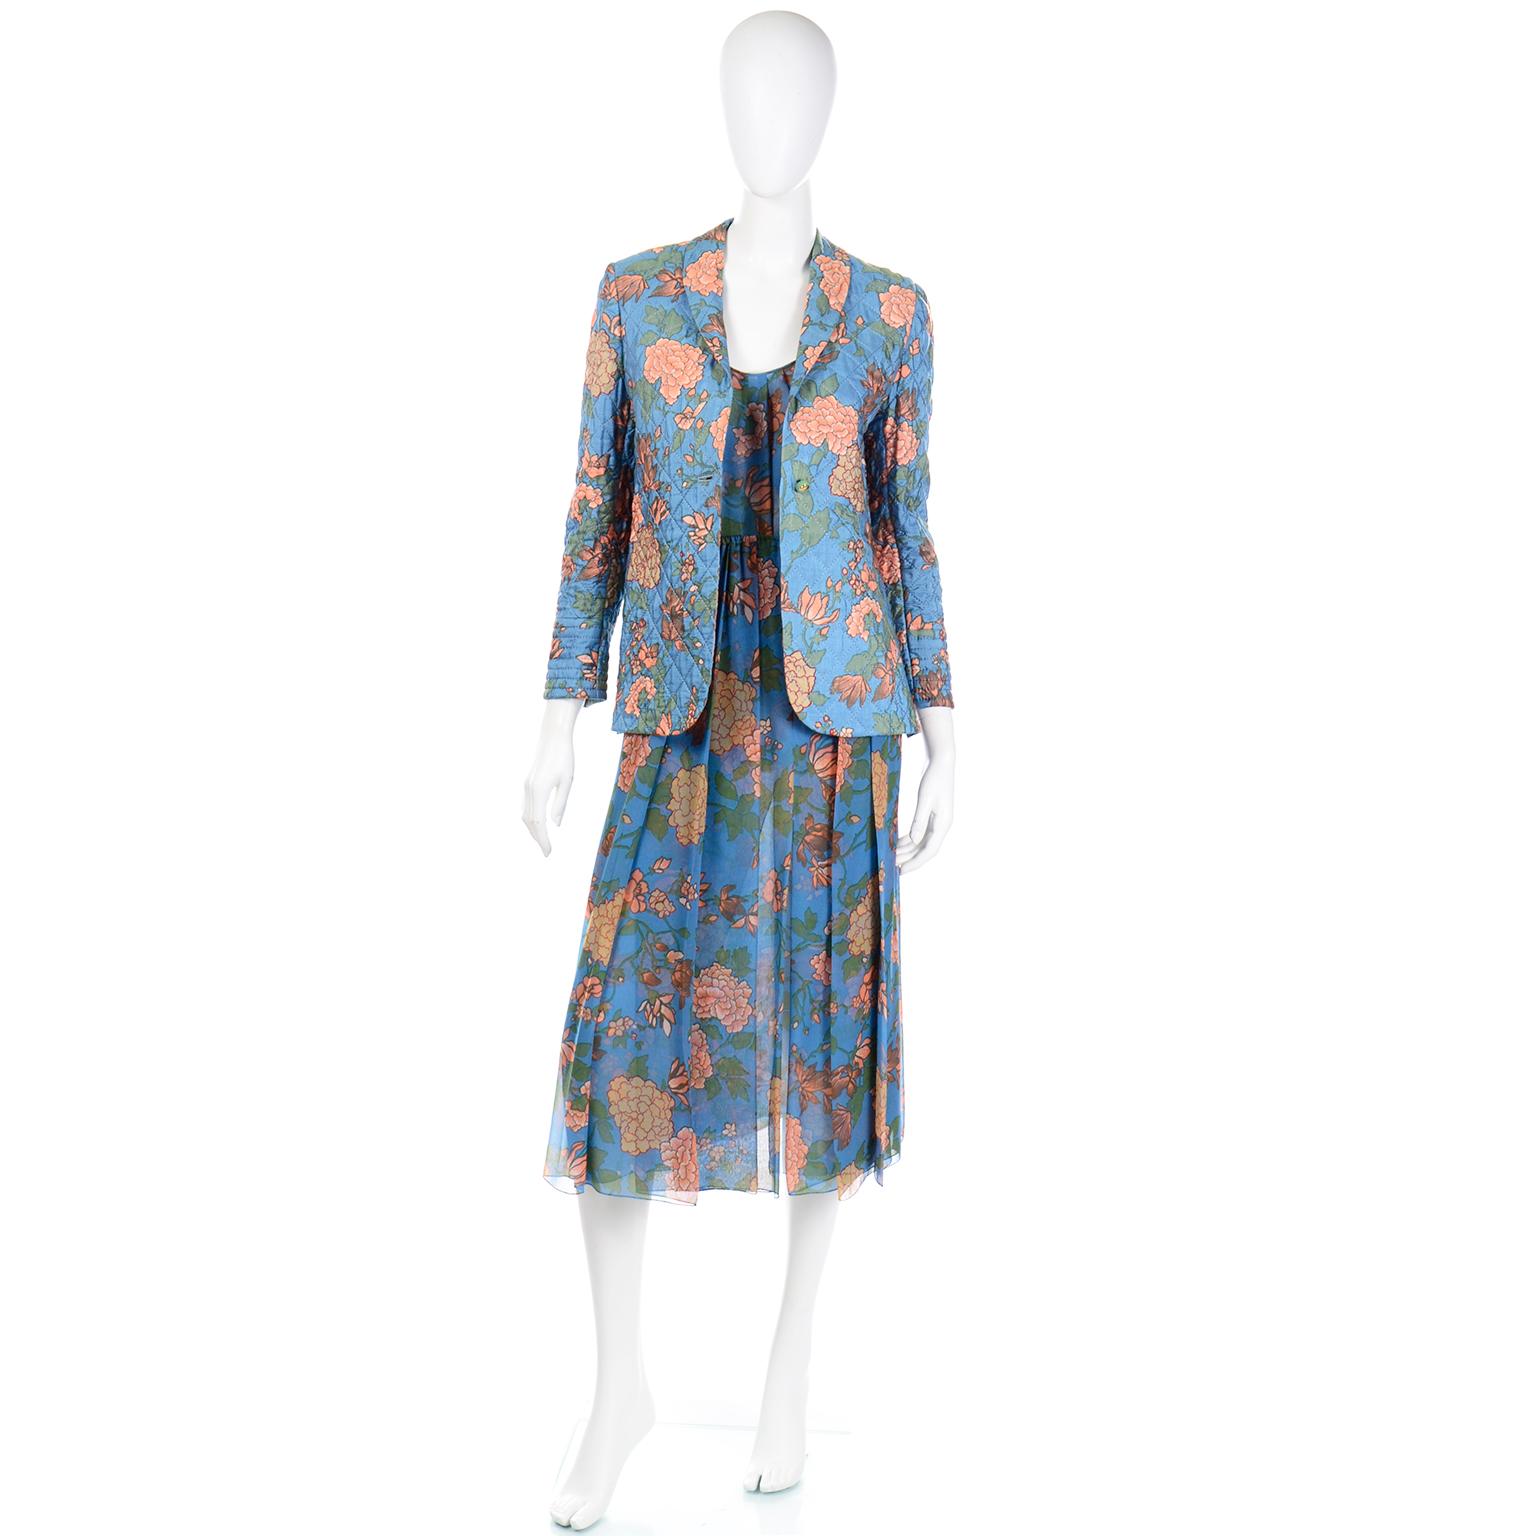 If you love vintage James Galanos pieces, you will absolutely love this incredible vintage 1970's 3 pc Galanos outfit! This exquisite outfit includes outfit includes a beautiful blue and peach floral print silk chiffon skirt with a matching silk